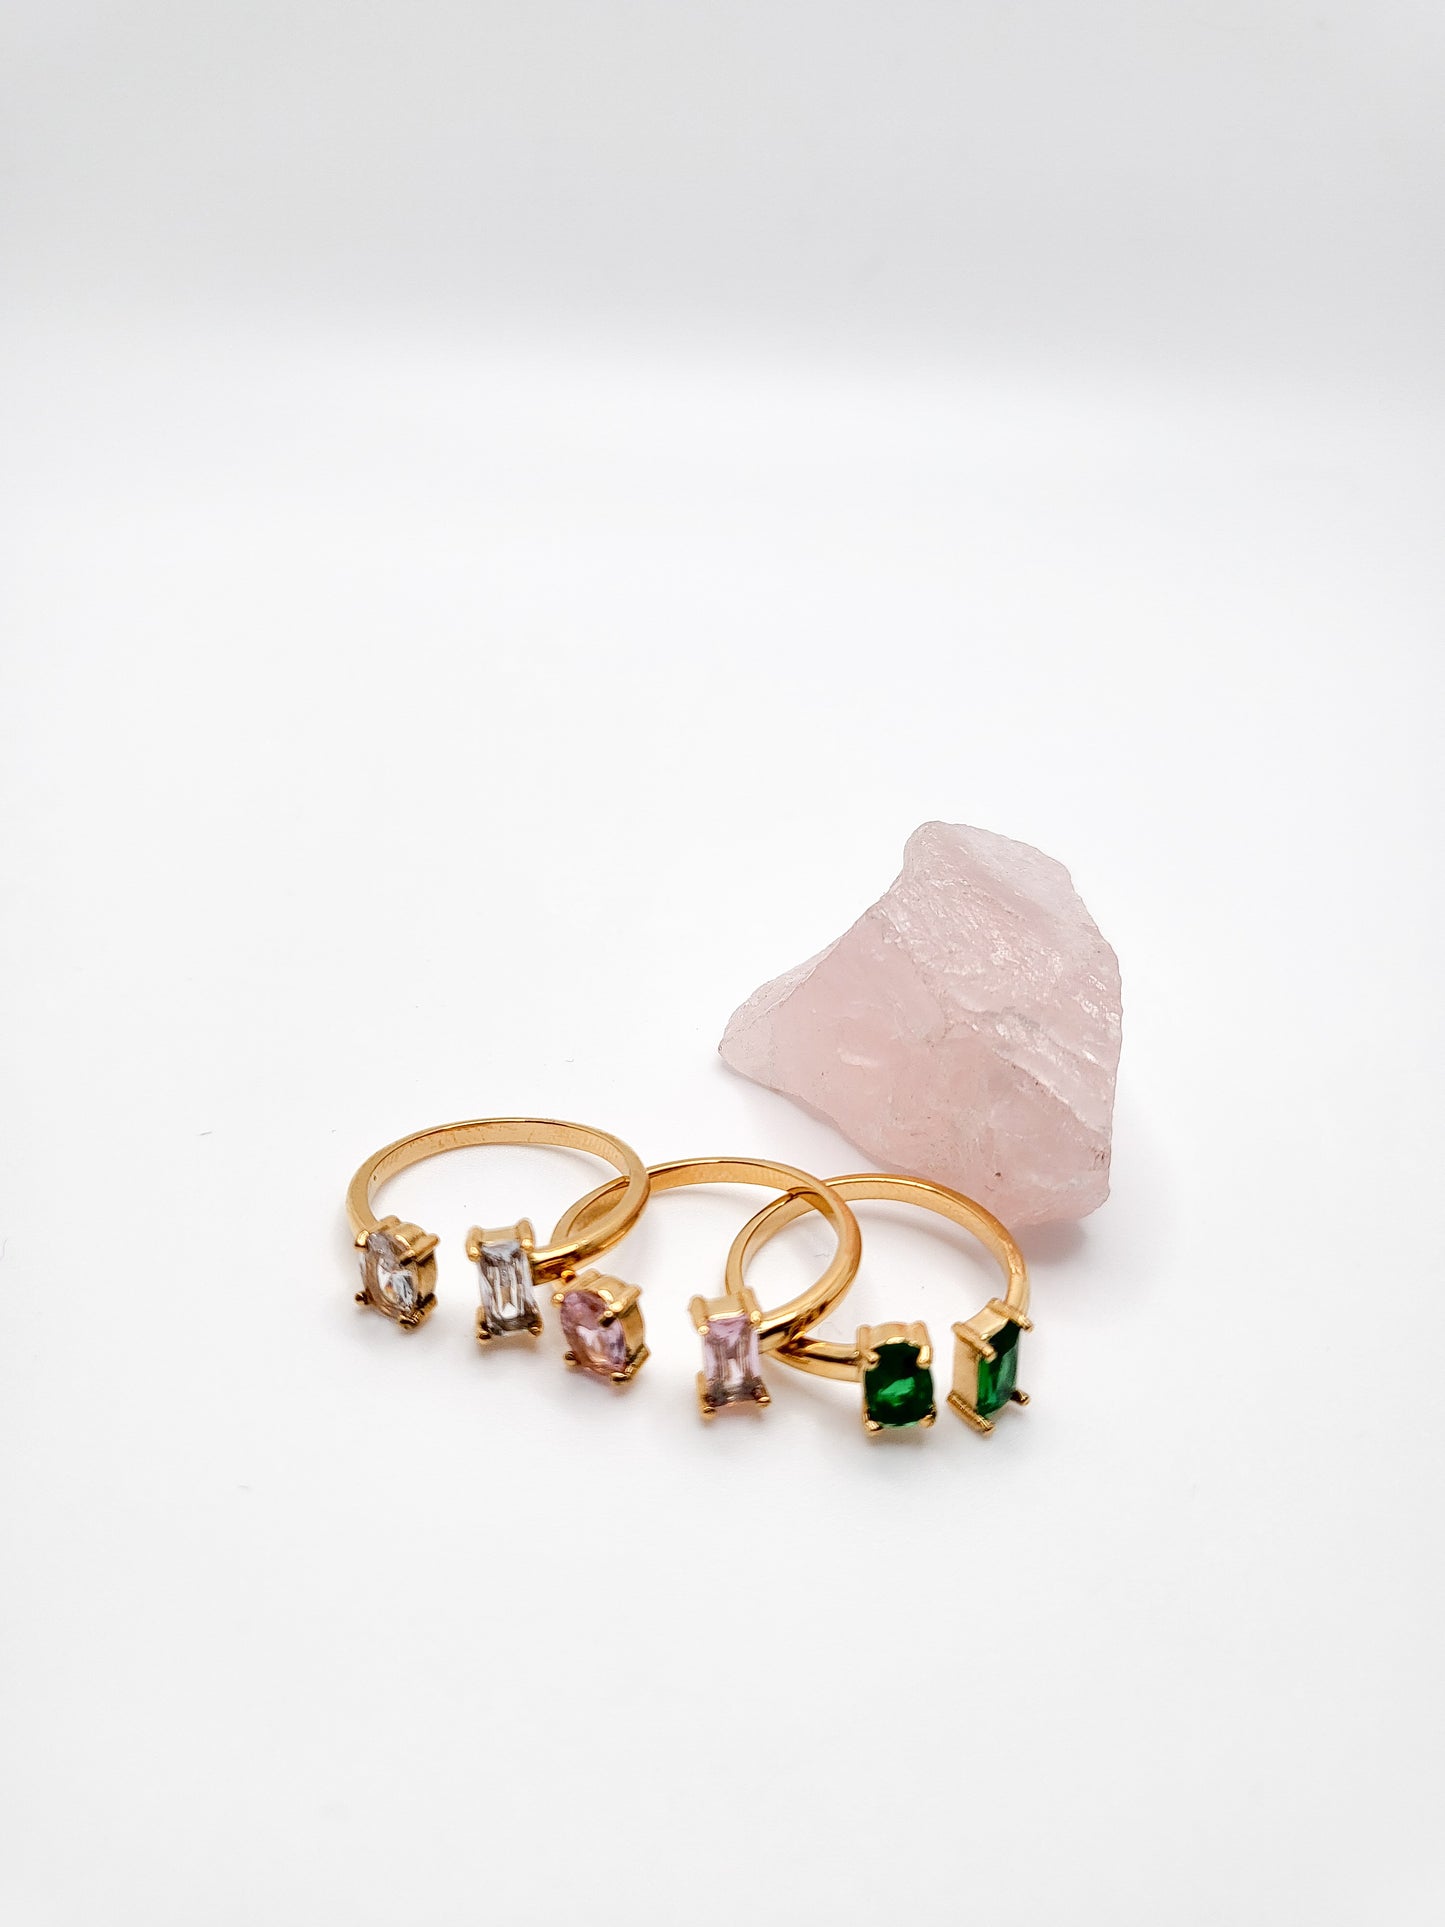 Gold plated rings with zircons in color green, pink or white